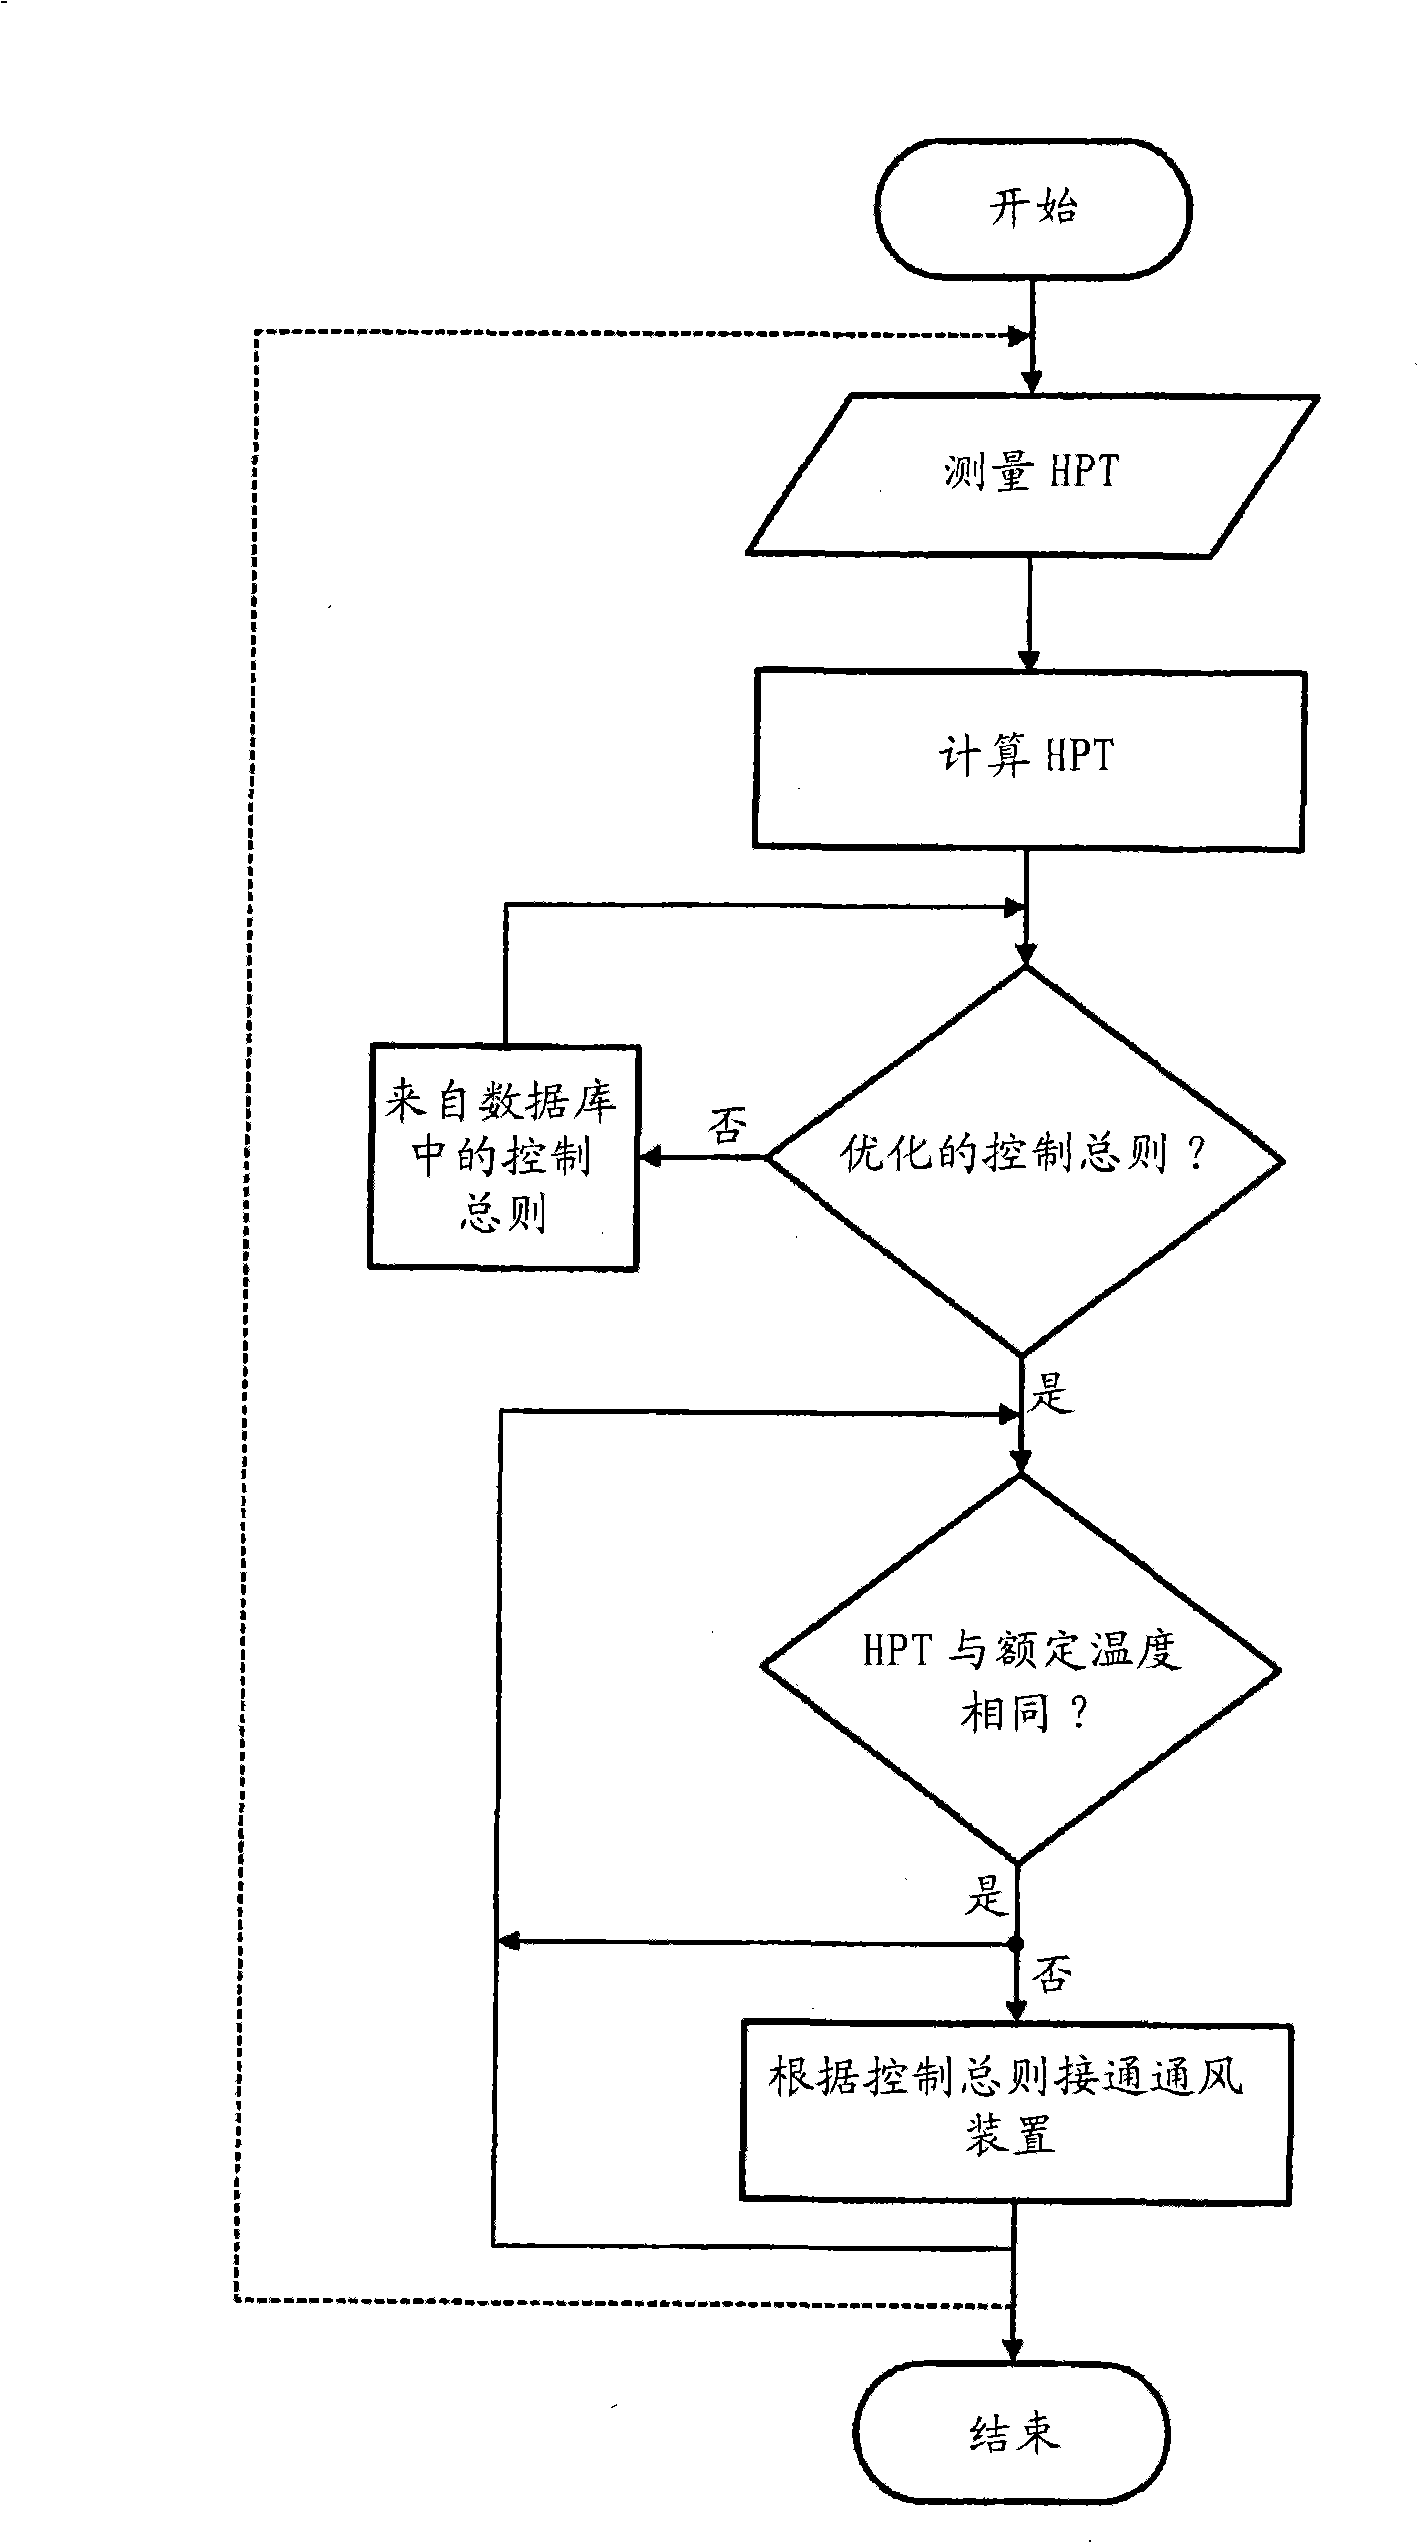 Control method for cooling an industrial plant